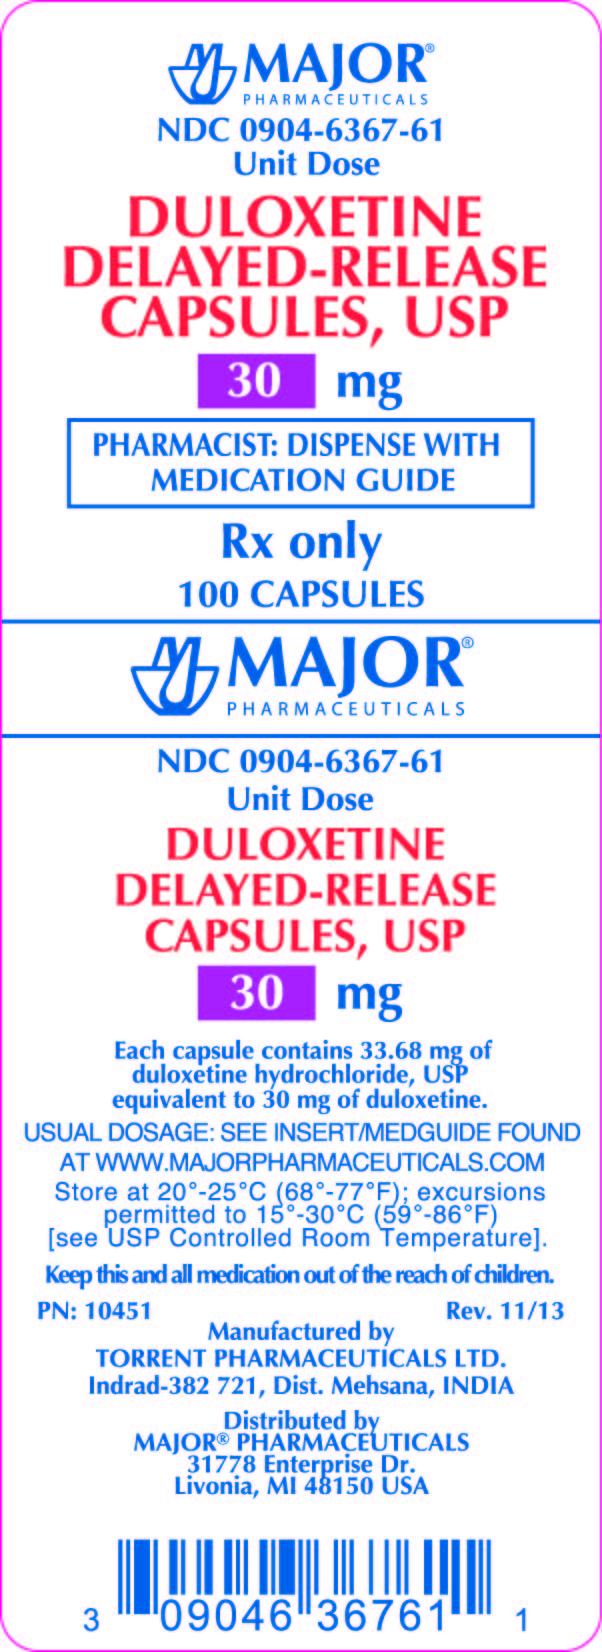 DULOXETINE DELAYED-RELEASE CAPSULES, USP 30MG